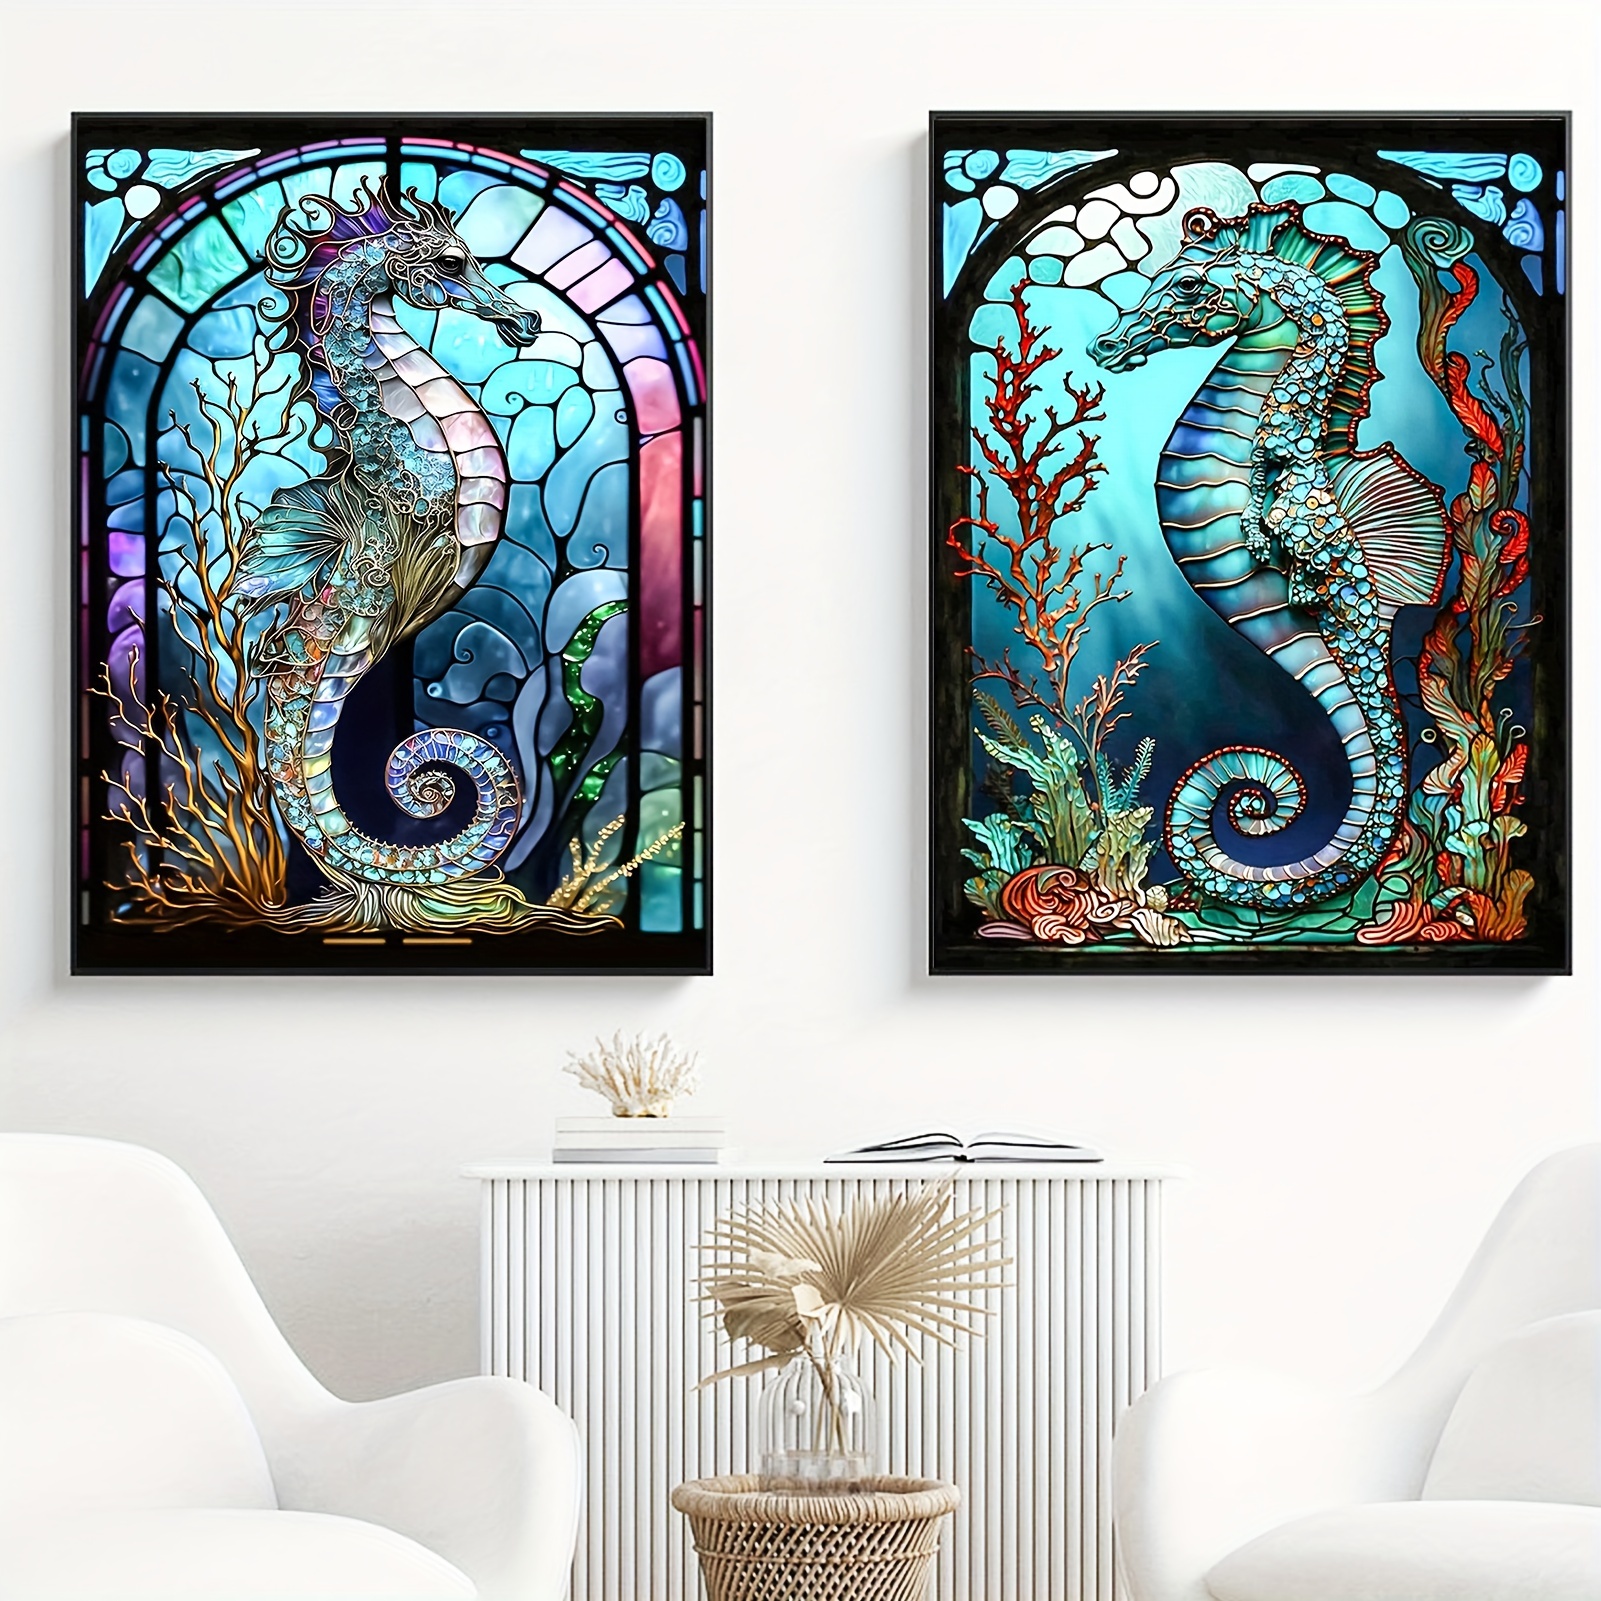 5D Diamond Painting Kits Seahorse Stained Glass DIY Diamond Full Round Drill Diamond Art Painting for Adults with Accessories for Home Wall Decor